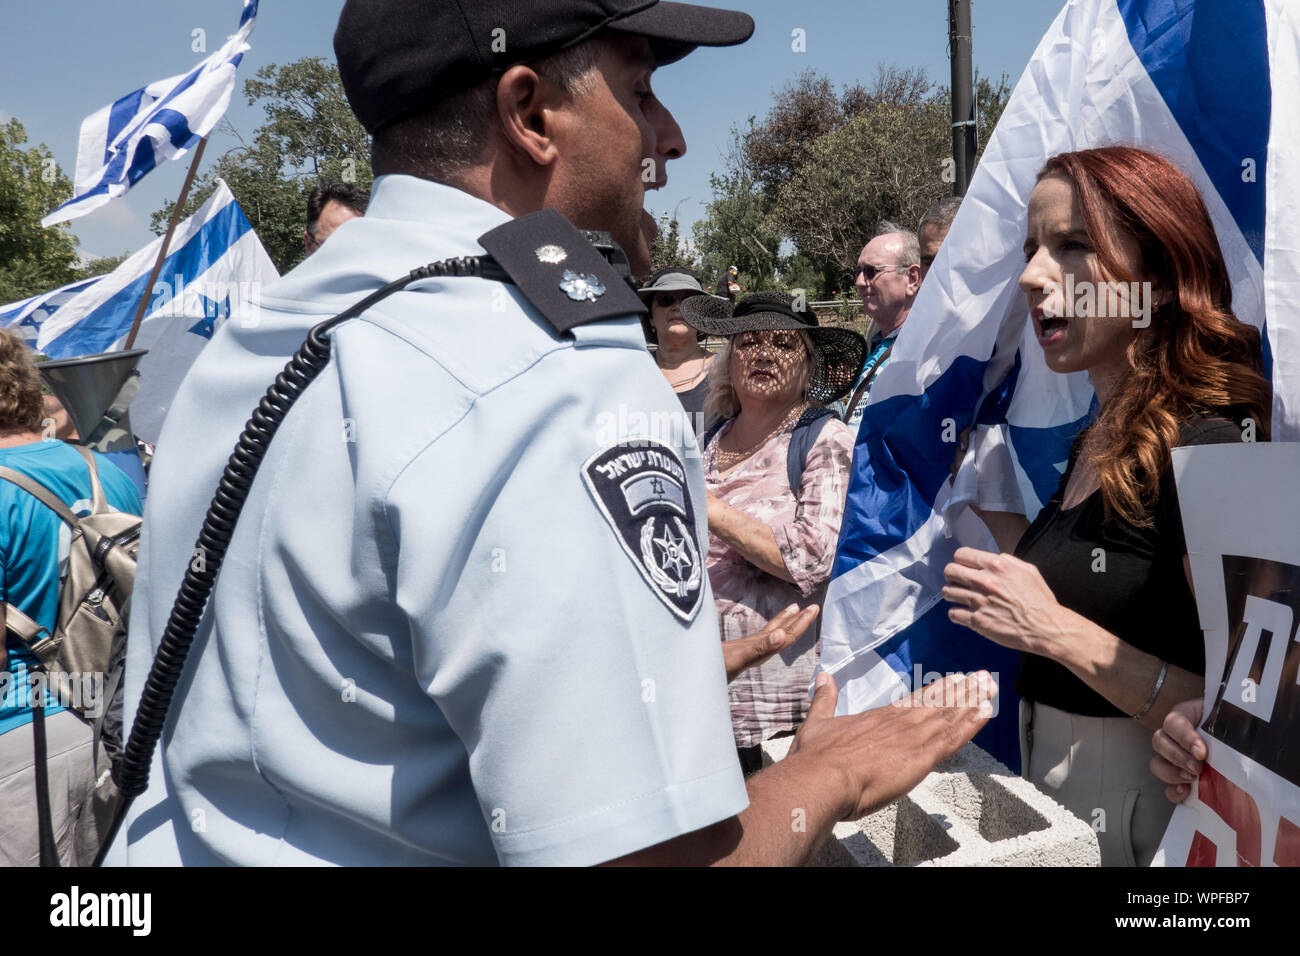 Jerusalem, Israel. 9th September, 2019. STAV SHAFFIR (R), former Labor MK and leader of 2011 Israeli social justice protests, number 2 on the the Democratic Union list, exchanges words with a police officer as activists block the access road to the Israeli Parliament. Credit: Nir Alon/Alamy Live News Stock Photo